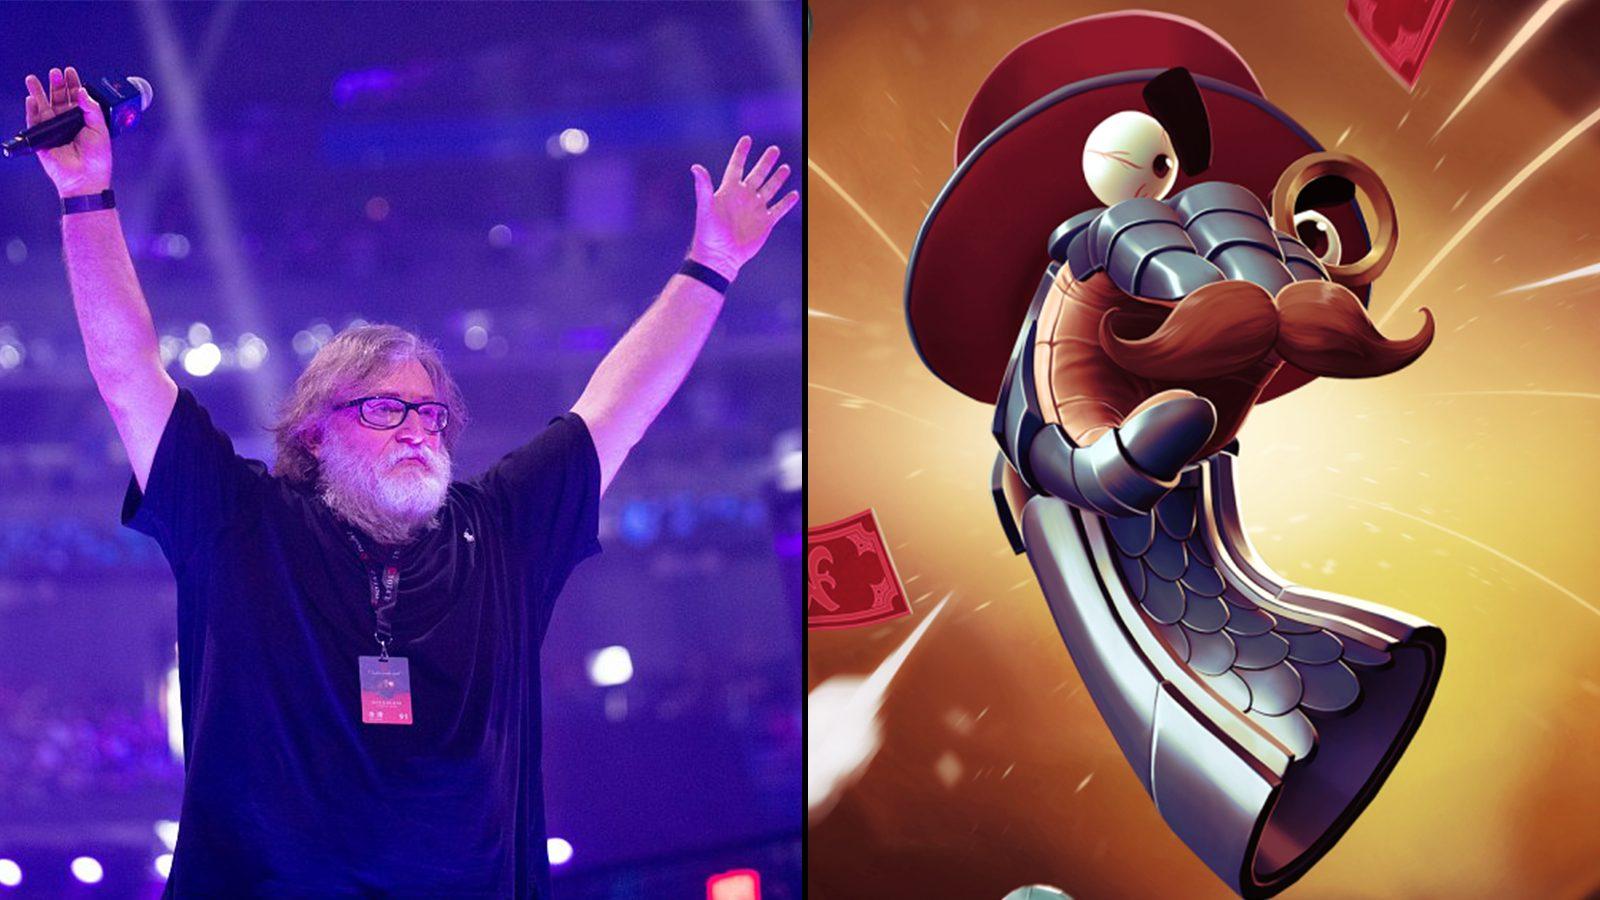 GabeN : Welcome To The International 2023